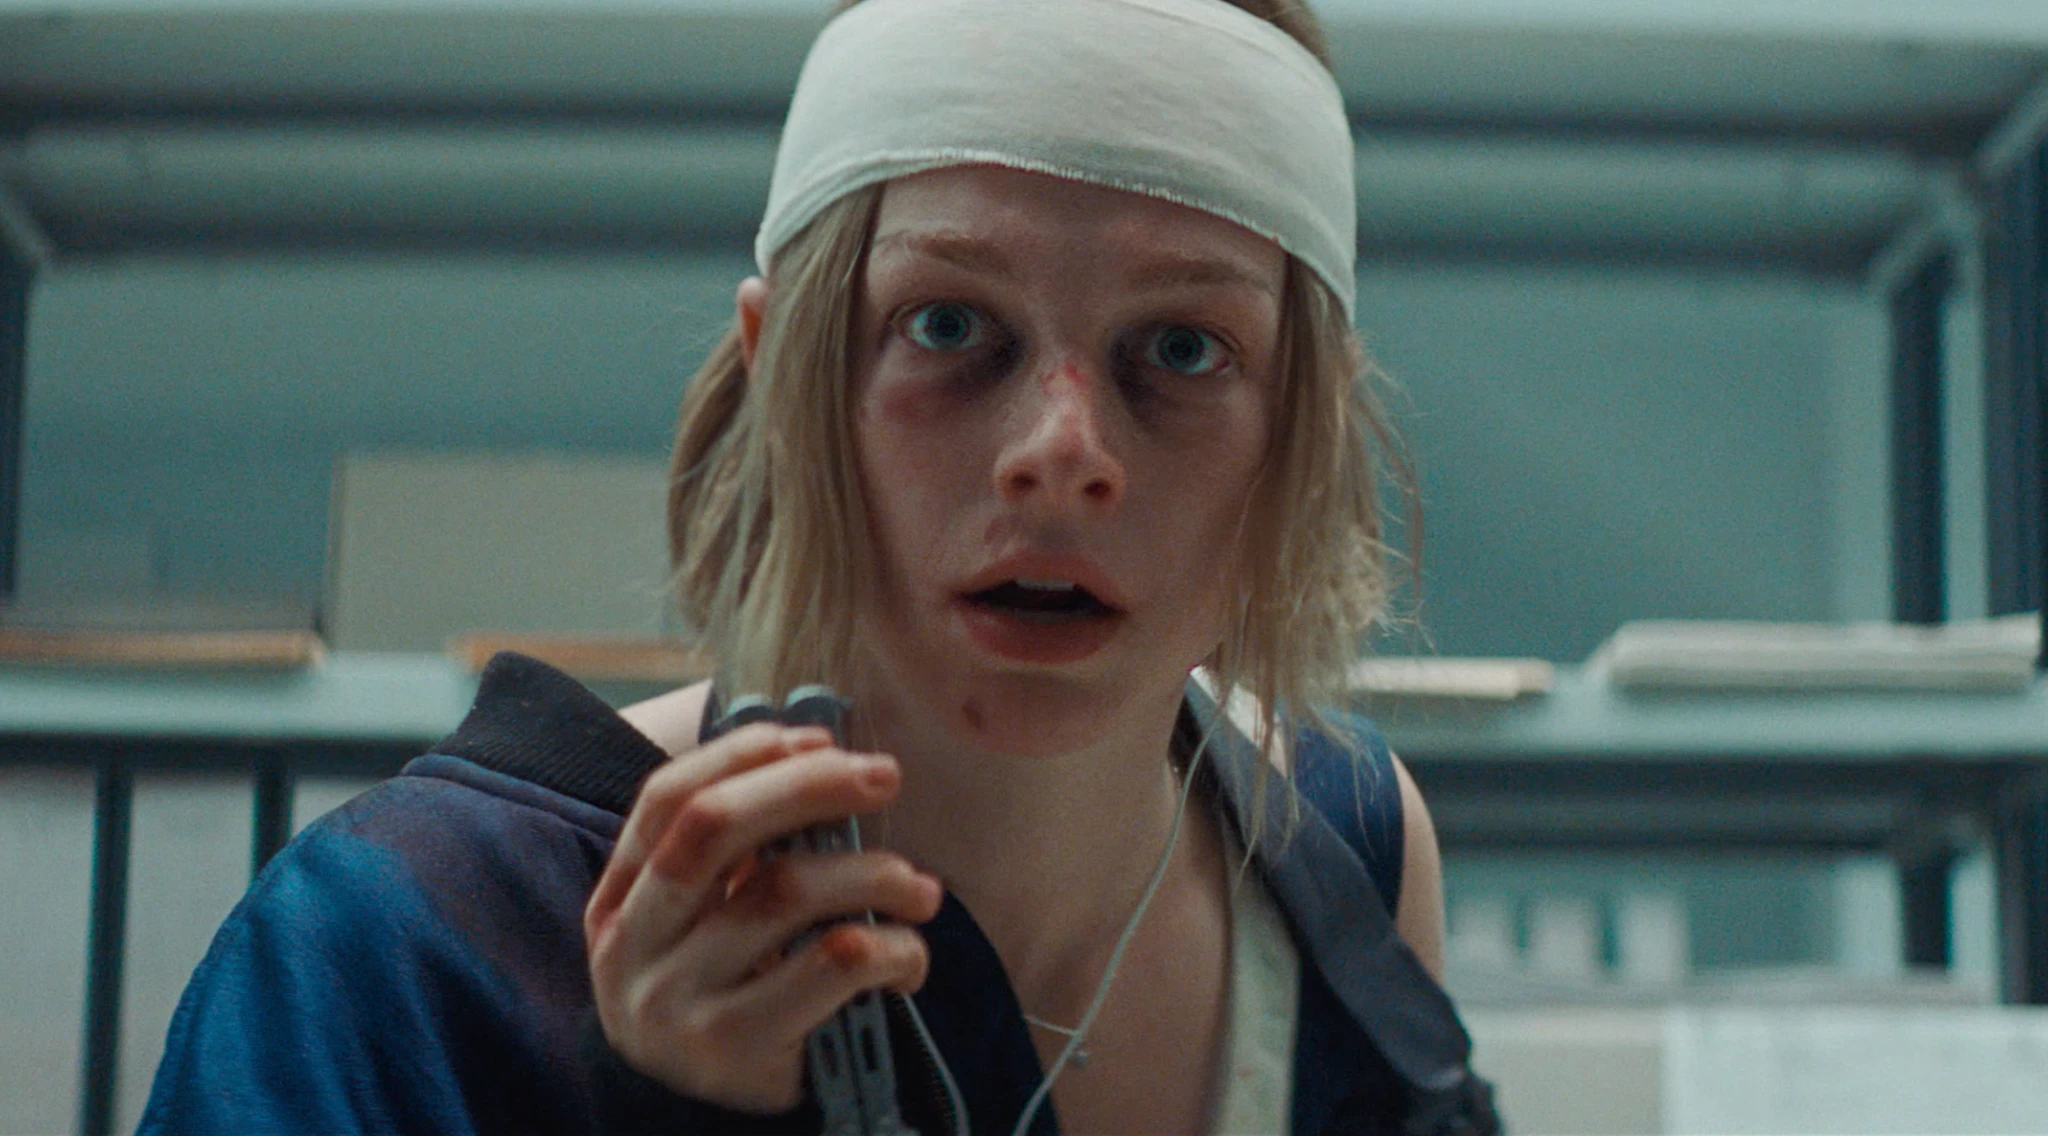 'Cuckoo' Trailer Takes Hunter Schafer on a Surreal Horror Trip